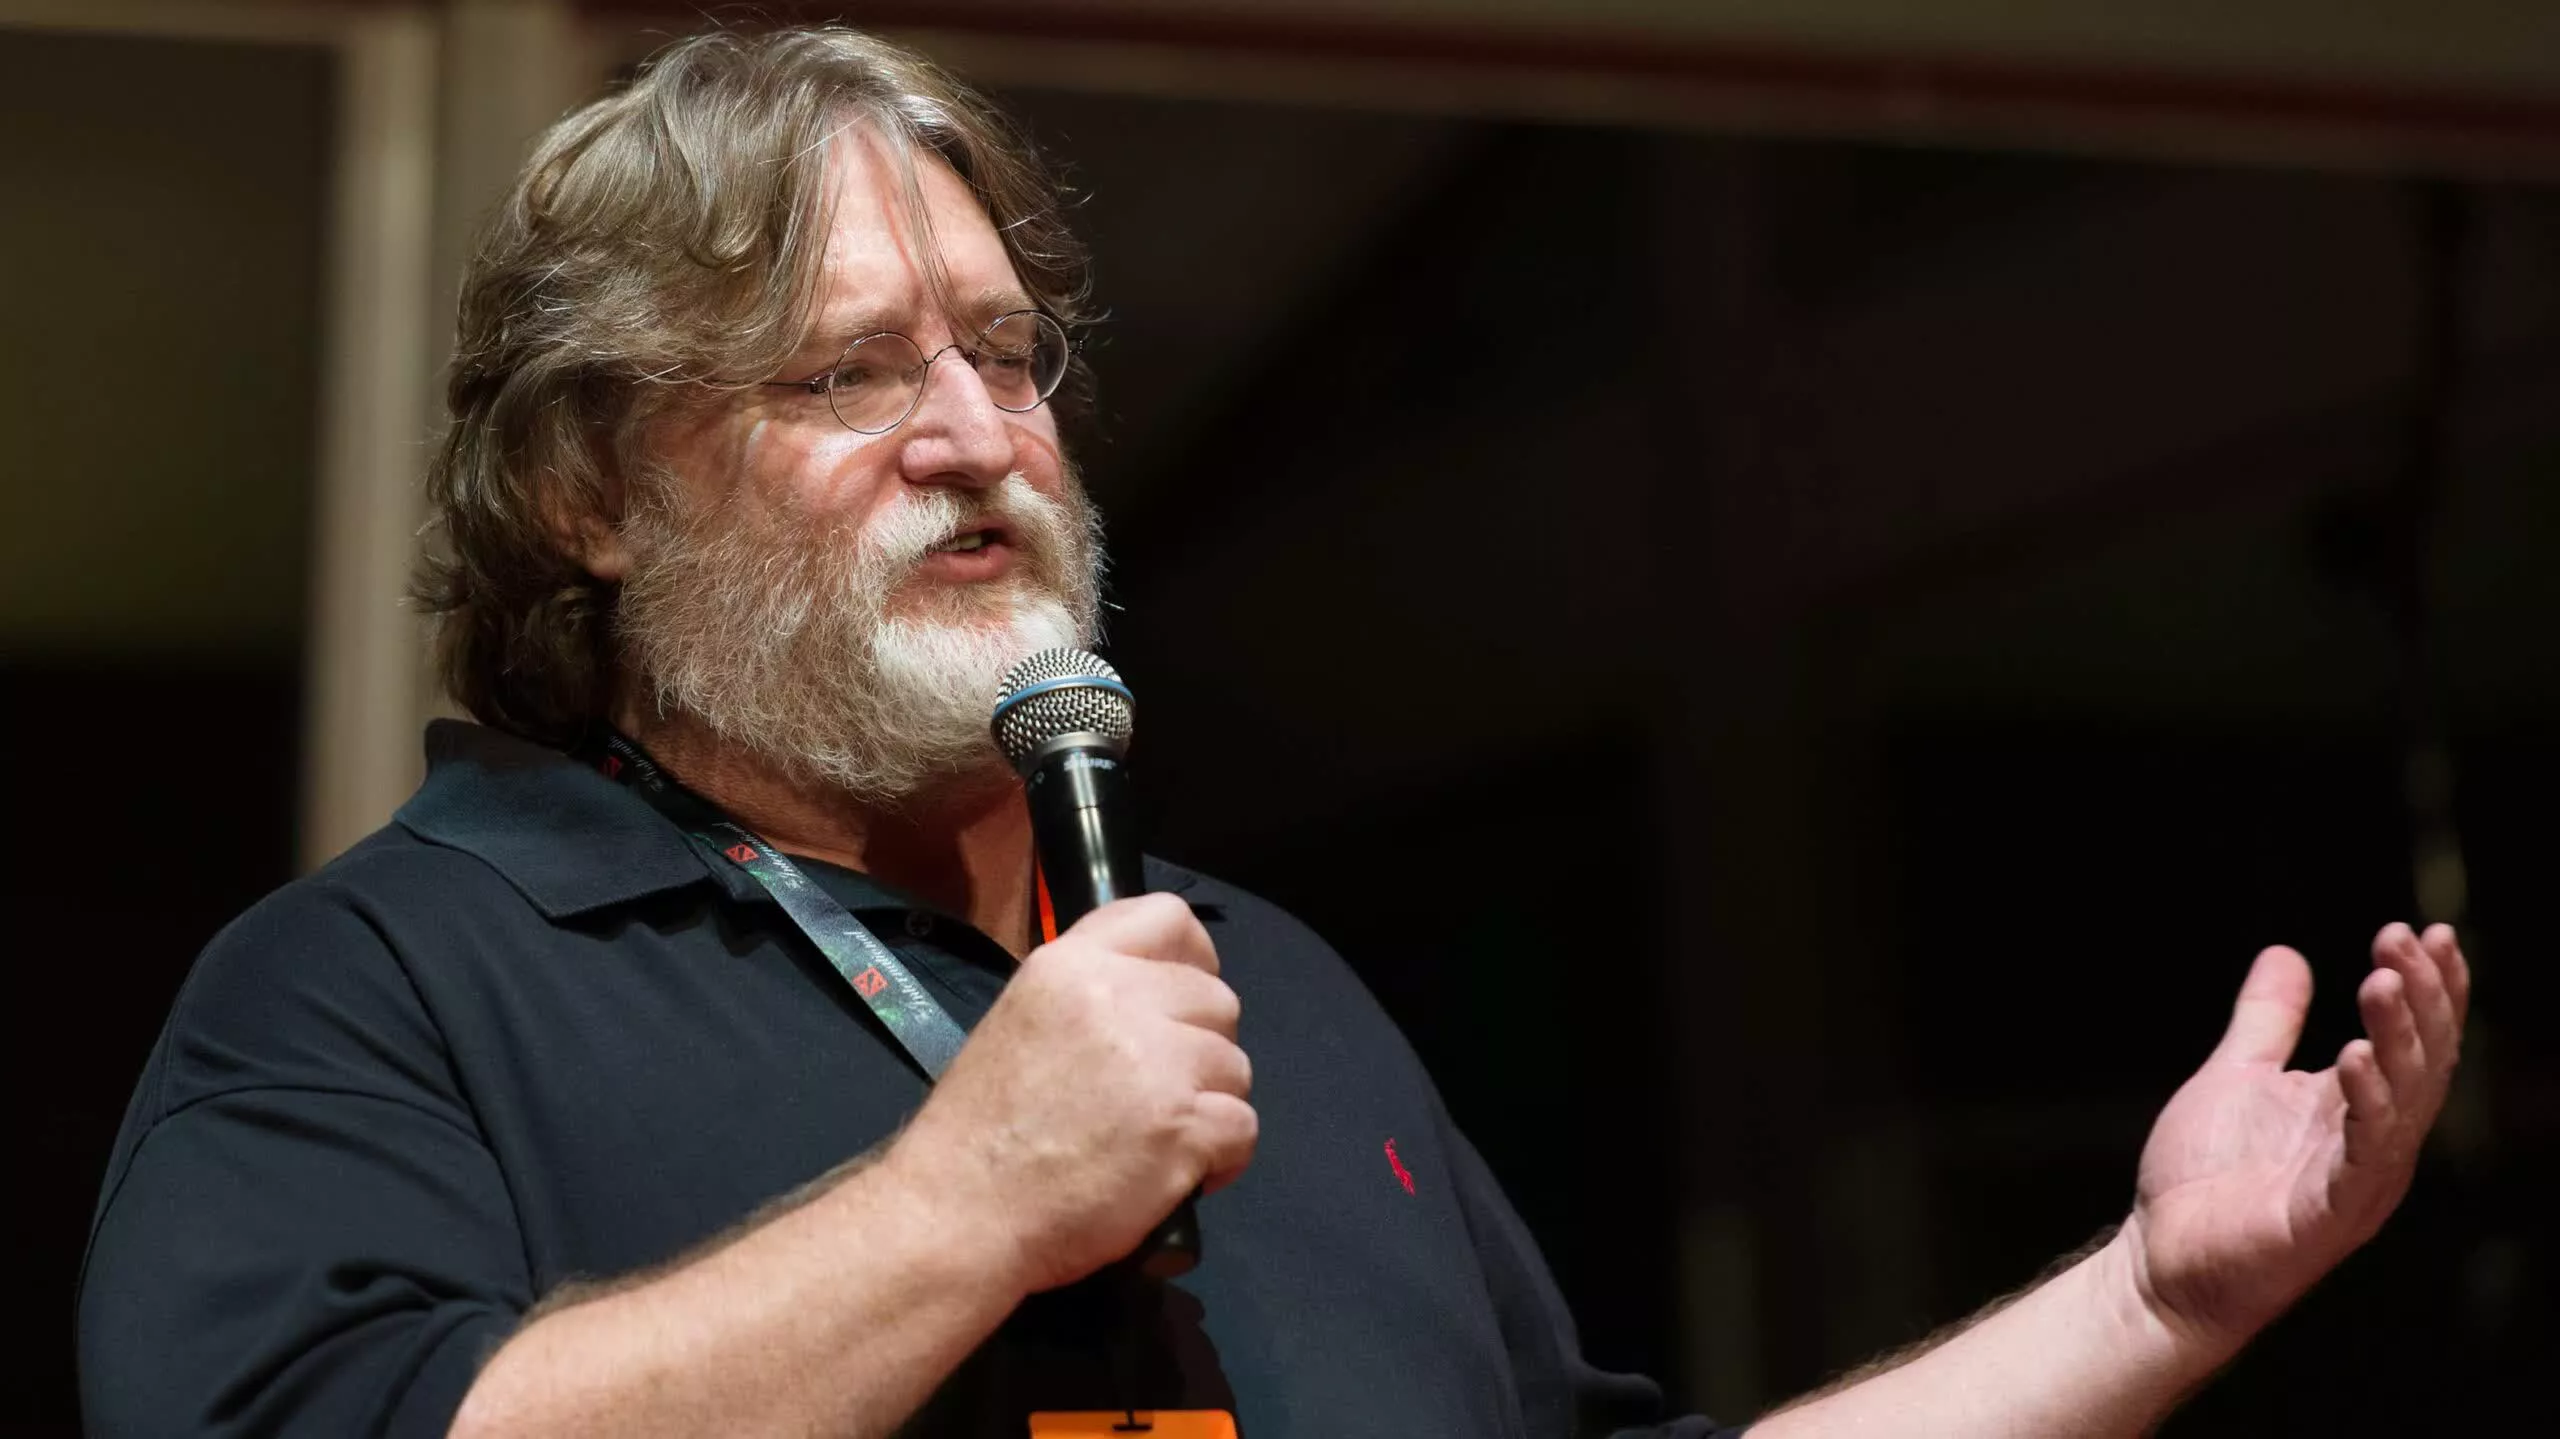 Gabe Newell says that 50% of Bitcoin transactions were fraudulent when Steam accepted the crypto